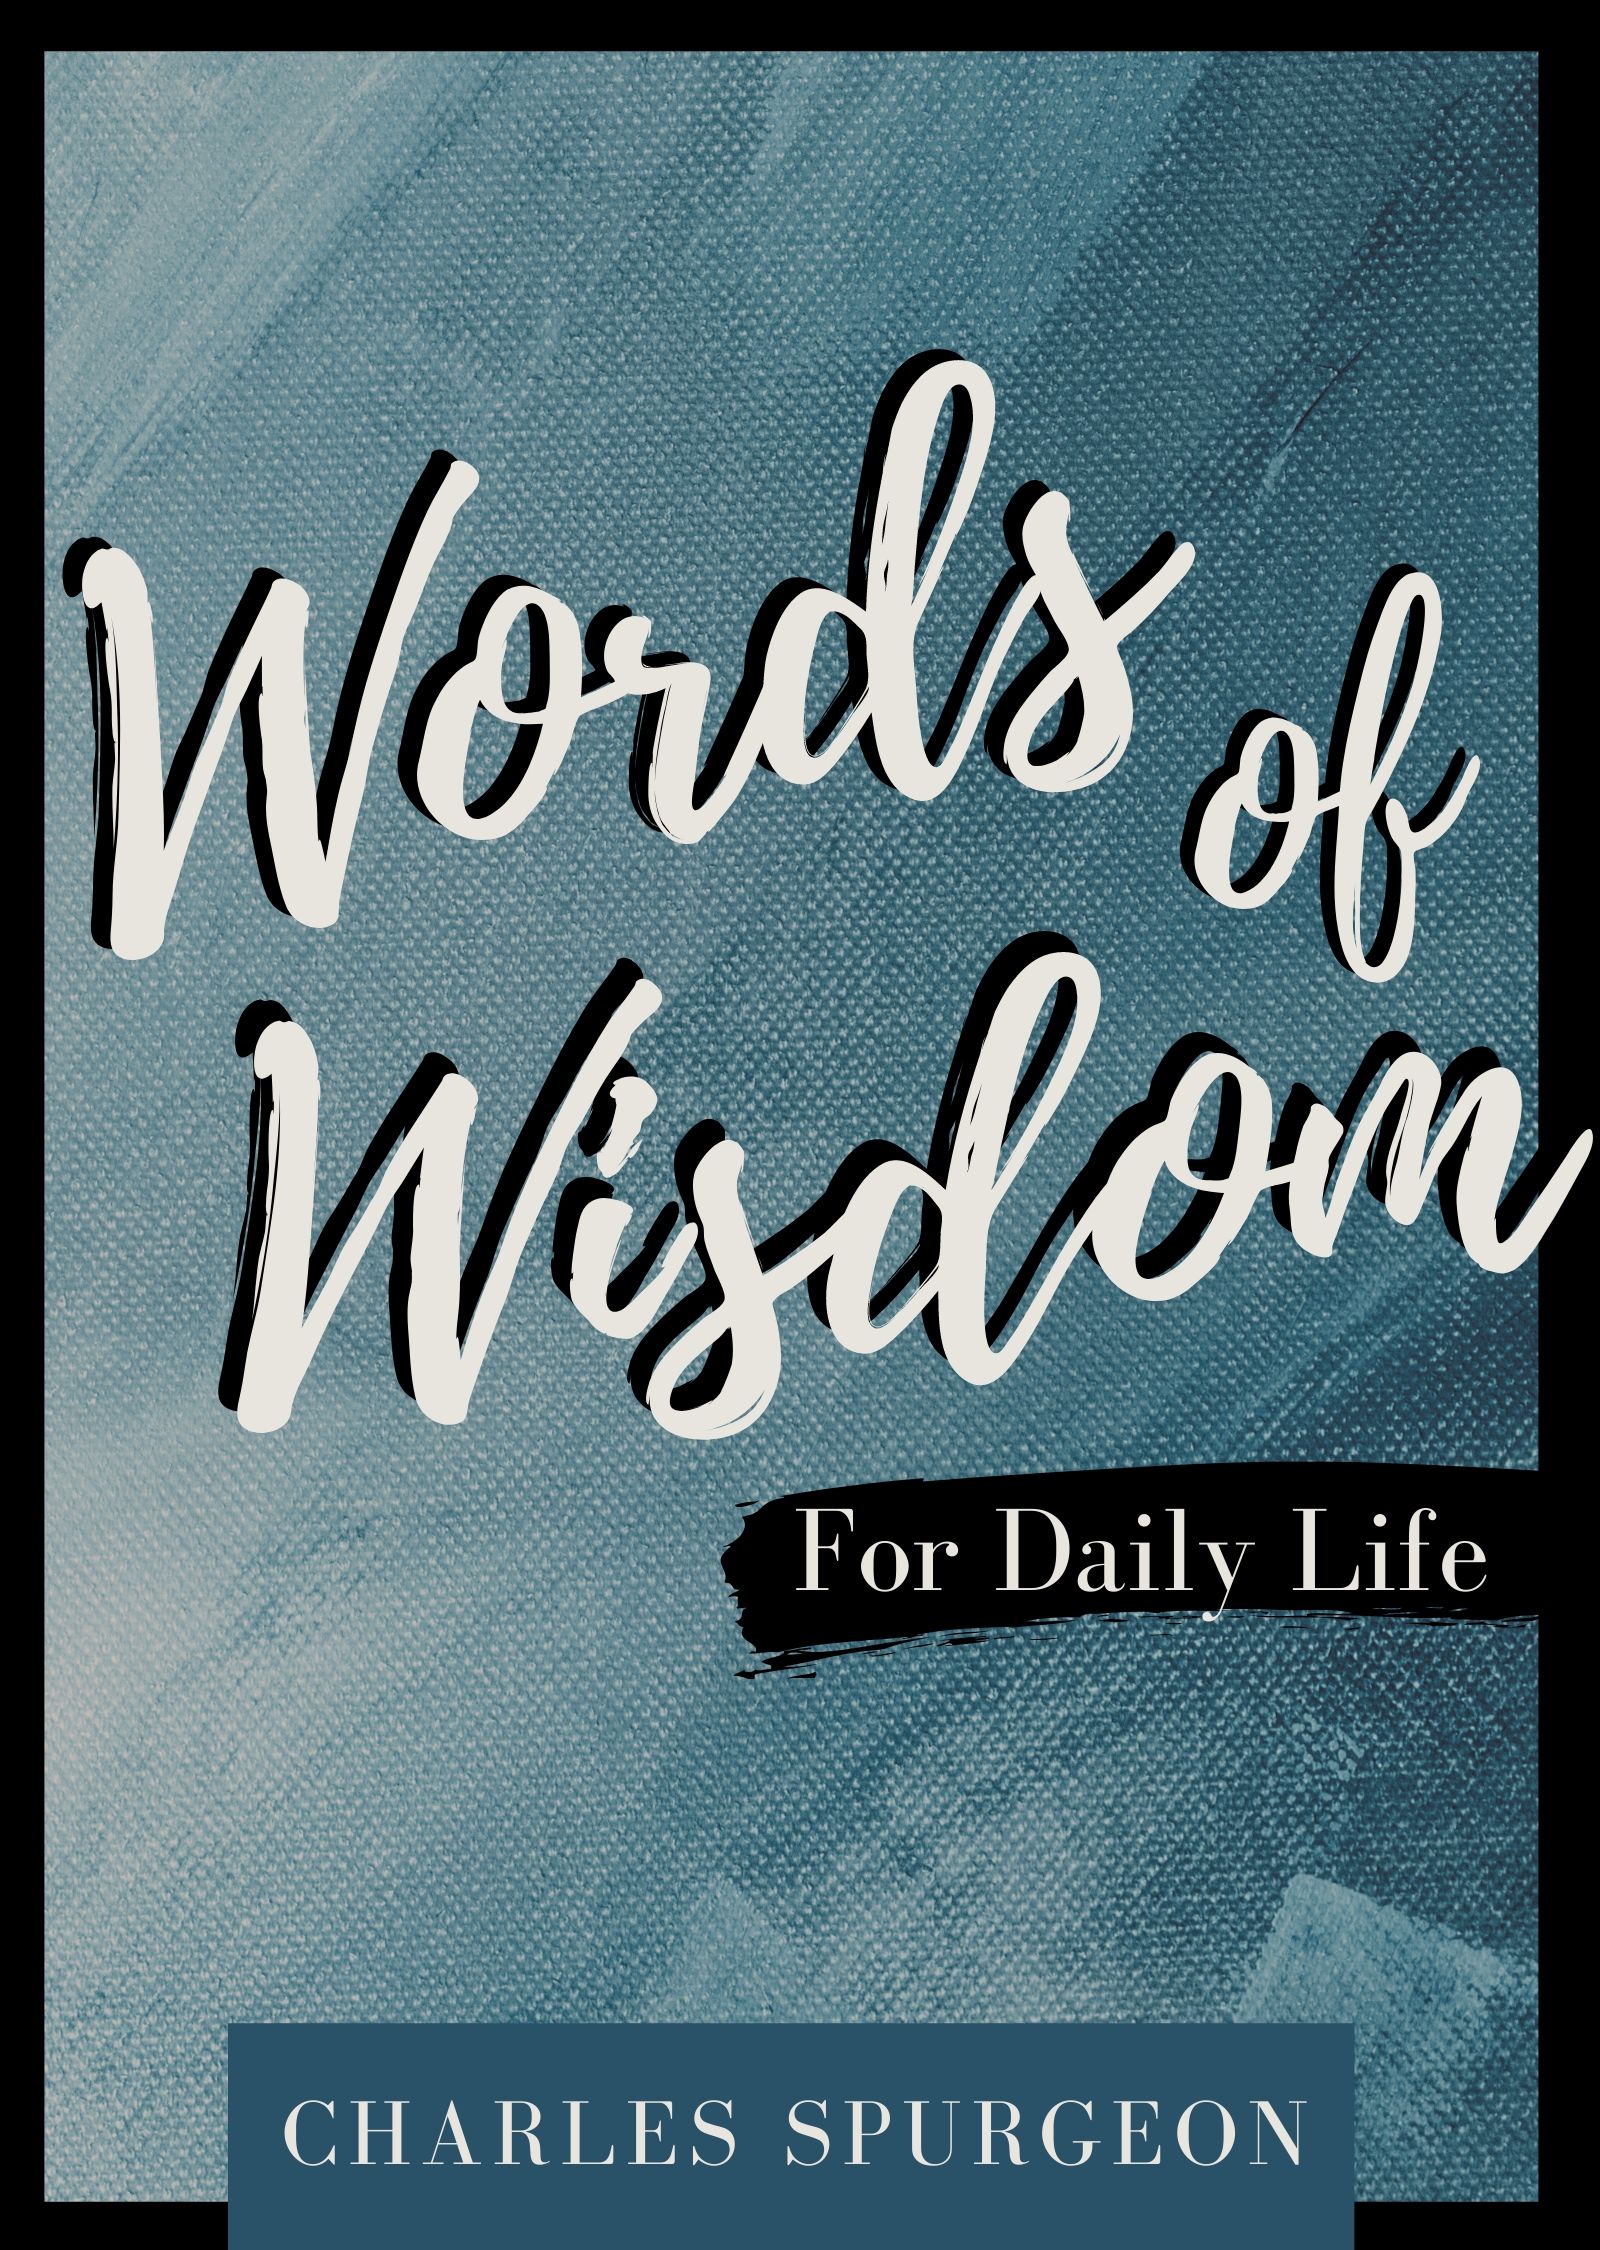 words-of-wisdom-for-daily-life-by-charles-spurgeon-for-the-olive